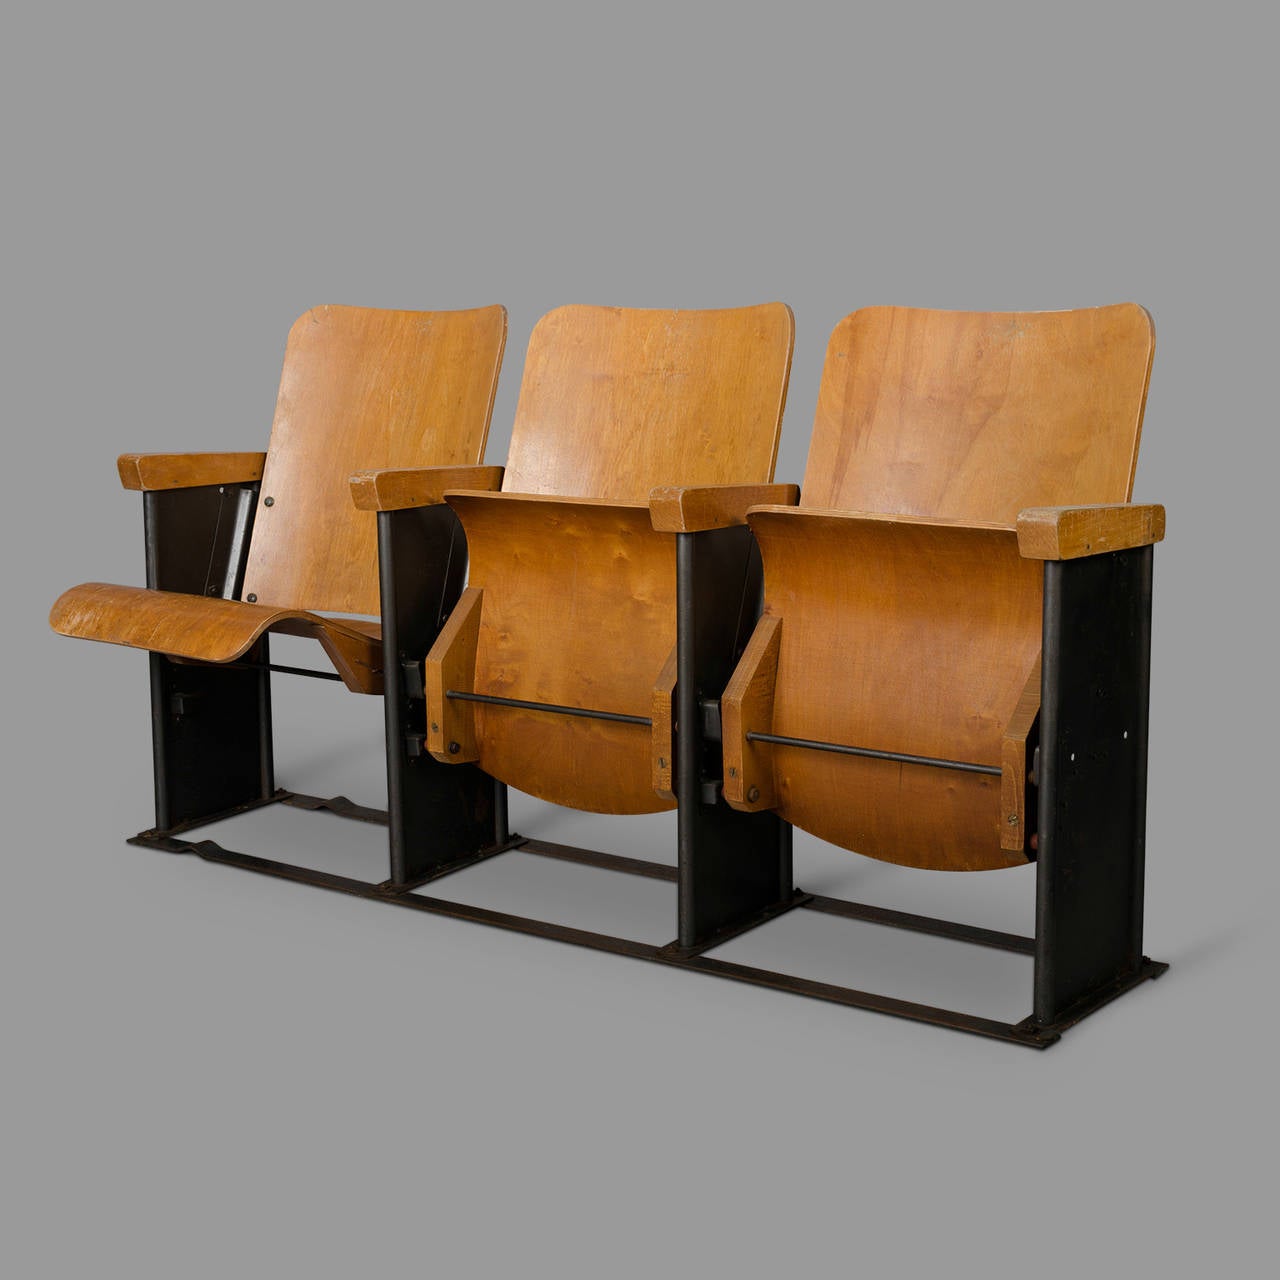 From a military base, these three seats row wooden movie theater seats in molded plywood and bent sheet metal, are typical of the 1950s. Very stable, they do not necessarily require floor fixation unlike many models of the same style.

Three seats